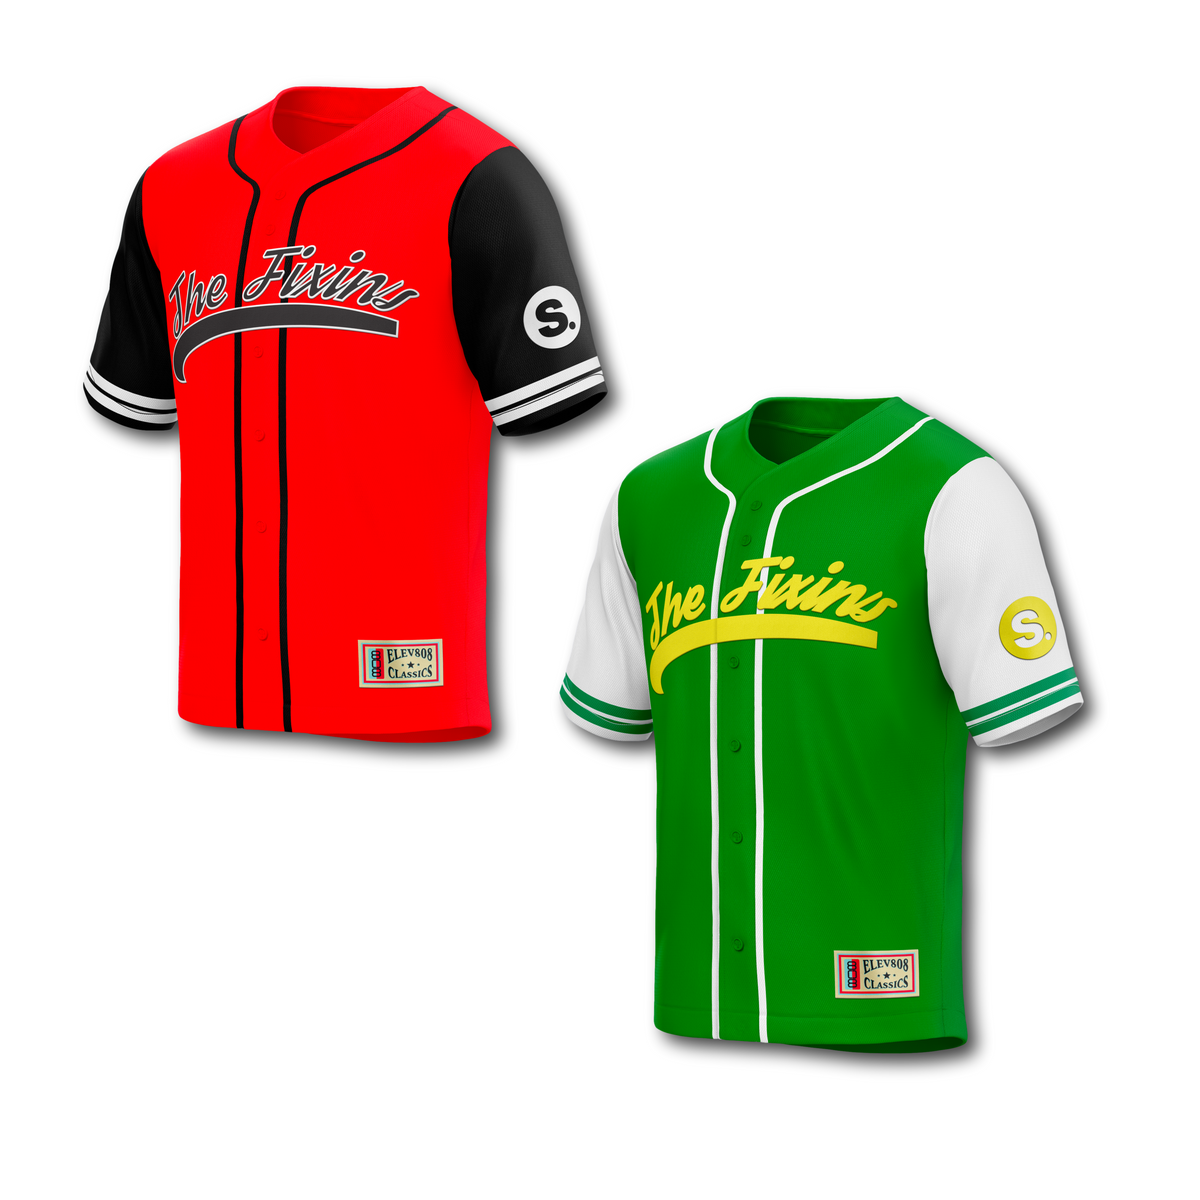 green and red baseball jersey